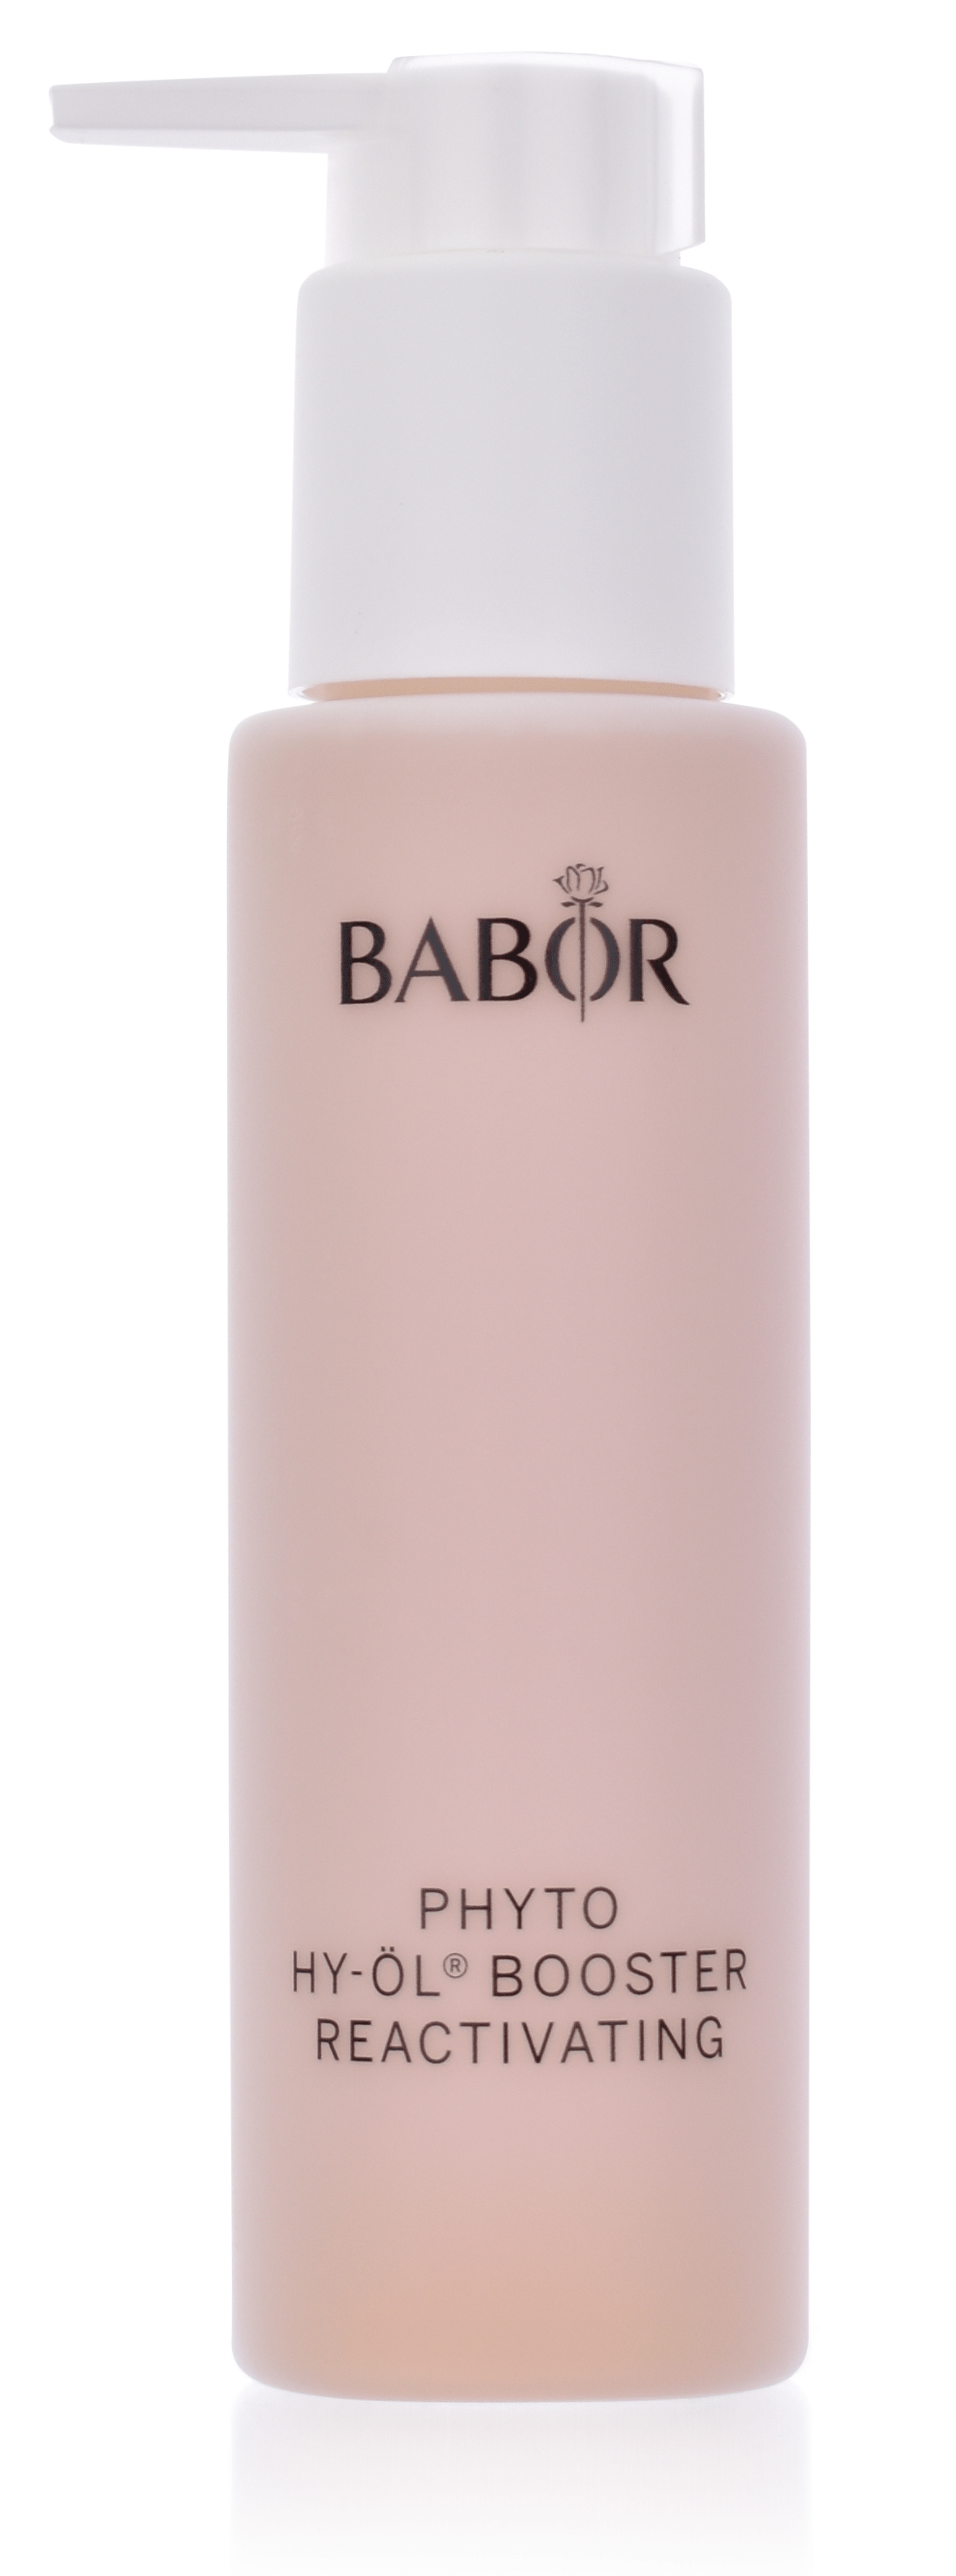 BABOR Cleansing - Phyto HY-ÖL Booster Reactivating 100 ml  